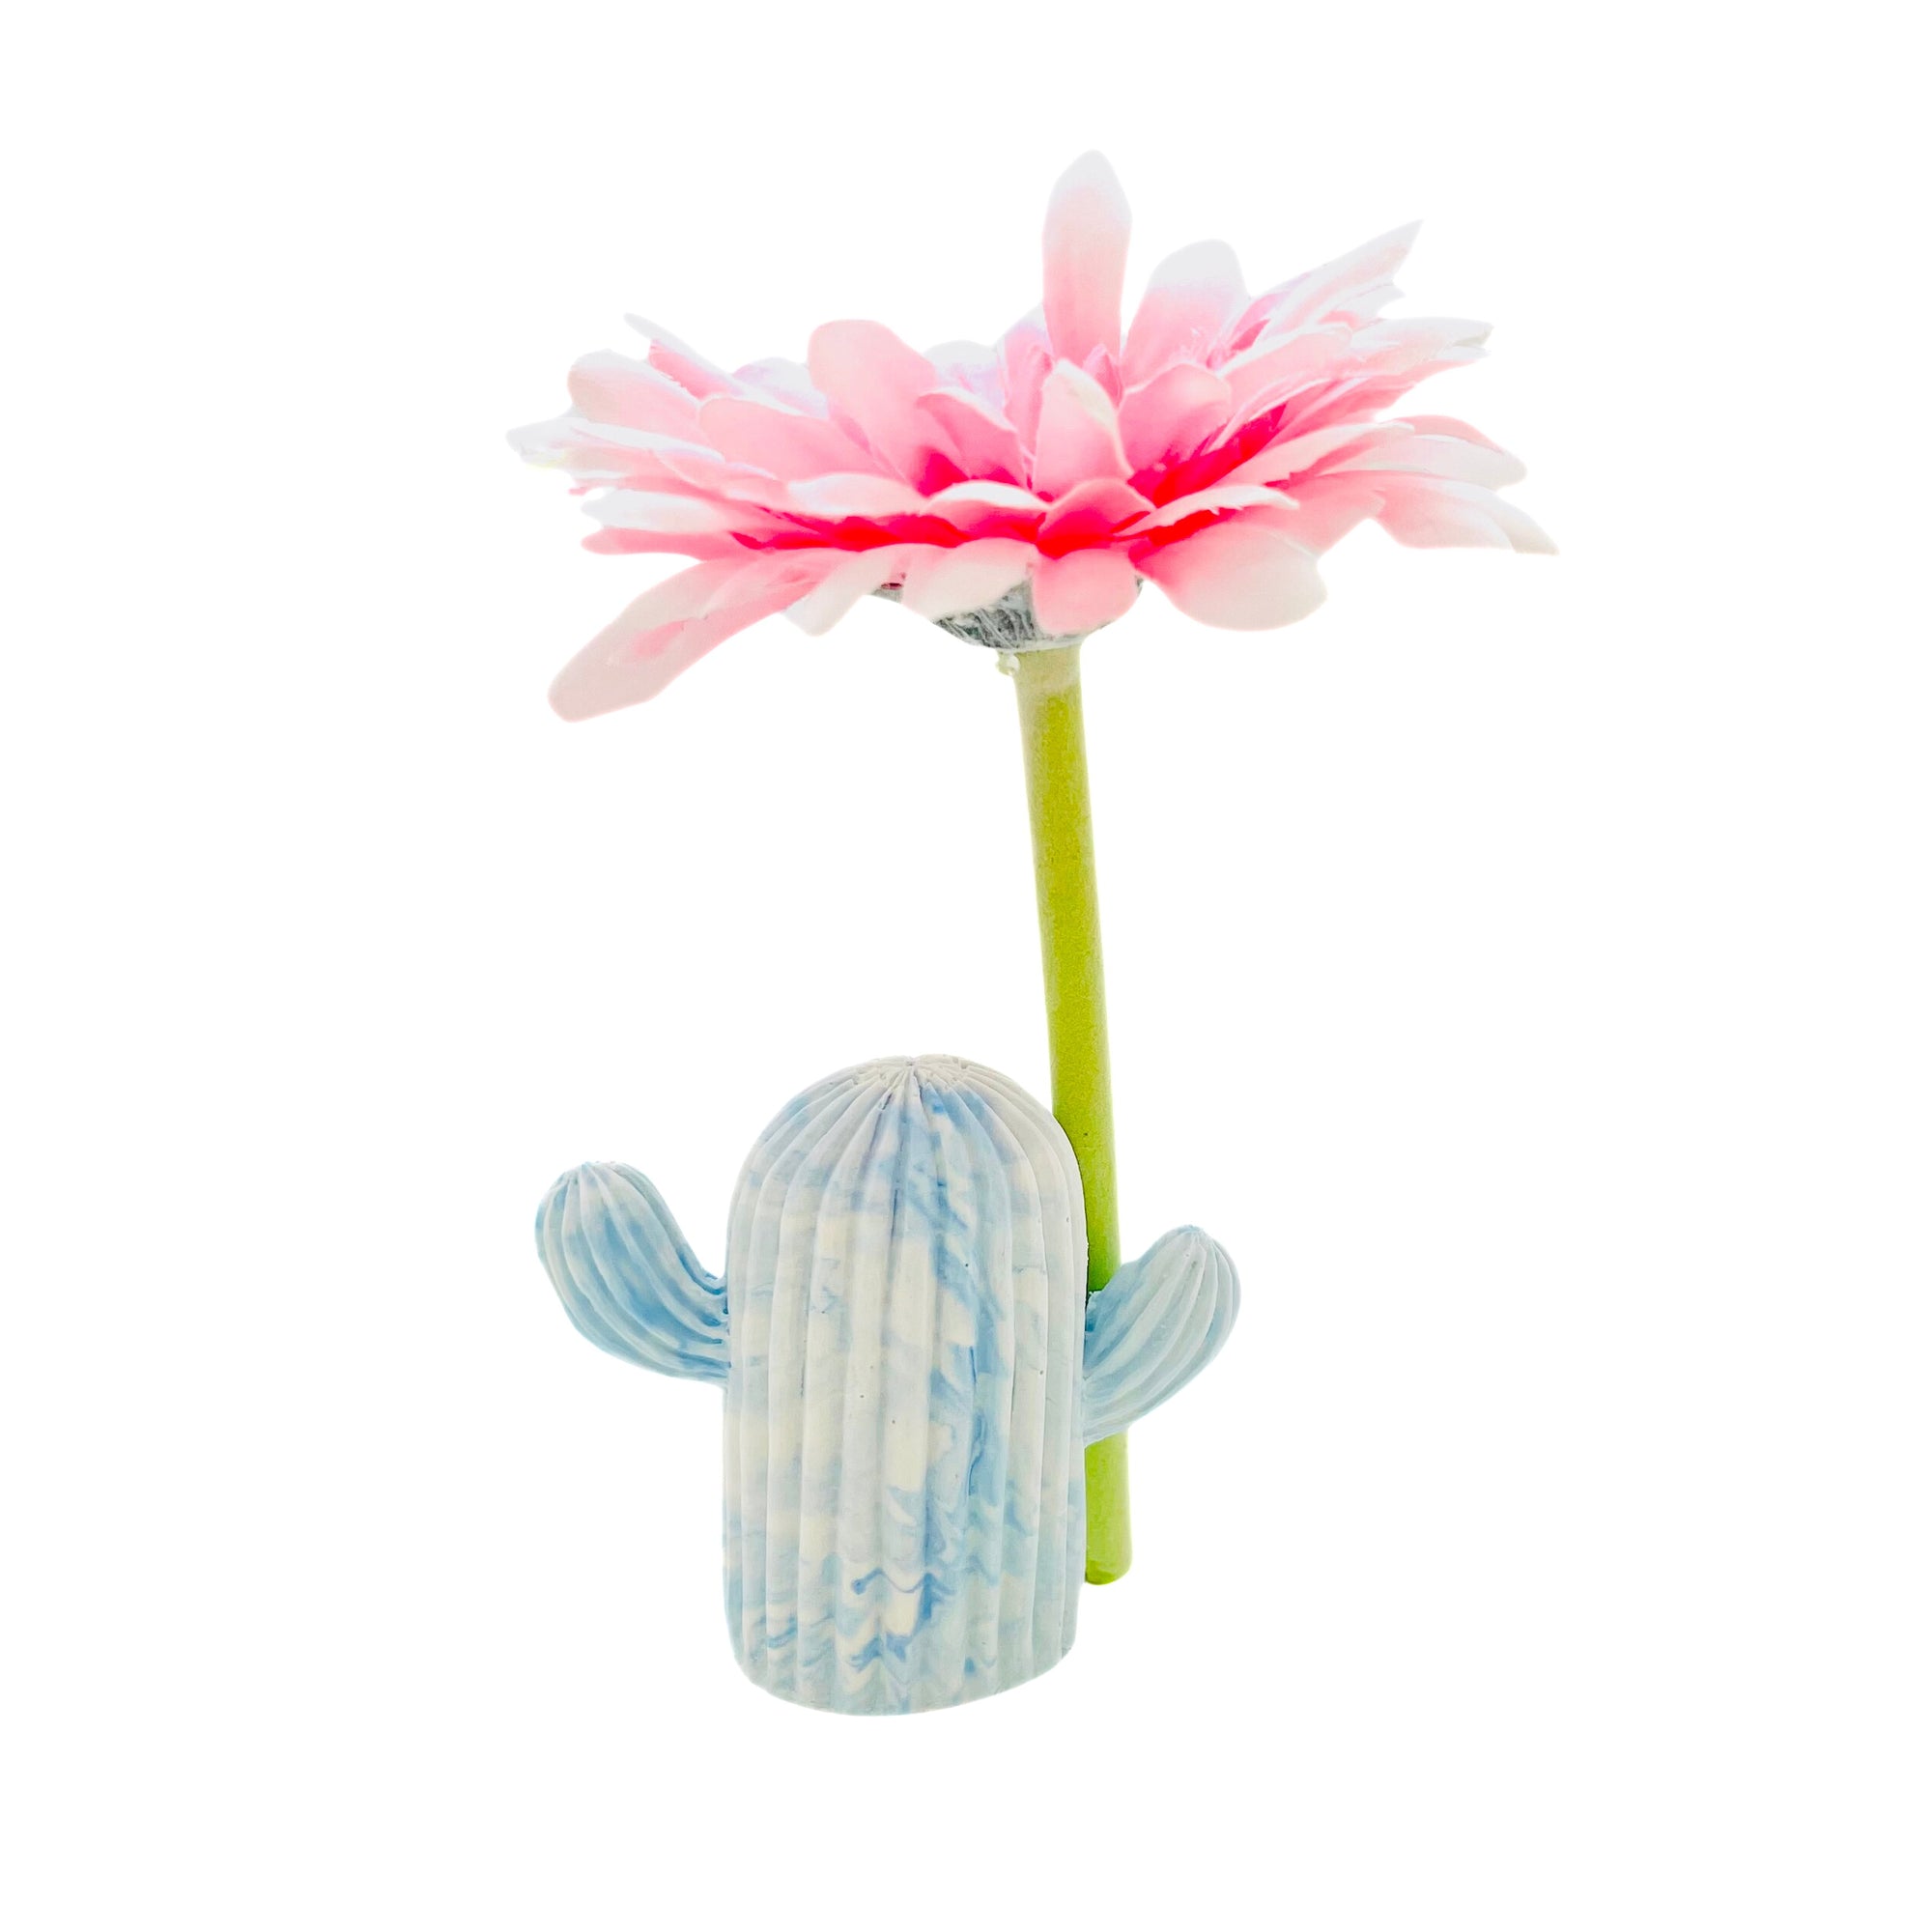 A medium size Jesmonite cactus measuring 7.5cm tall marbled with baby blue pigment.